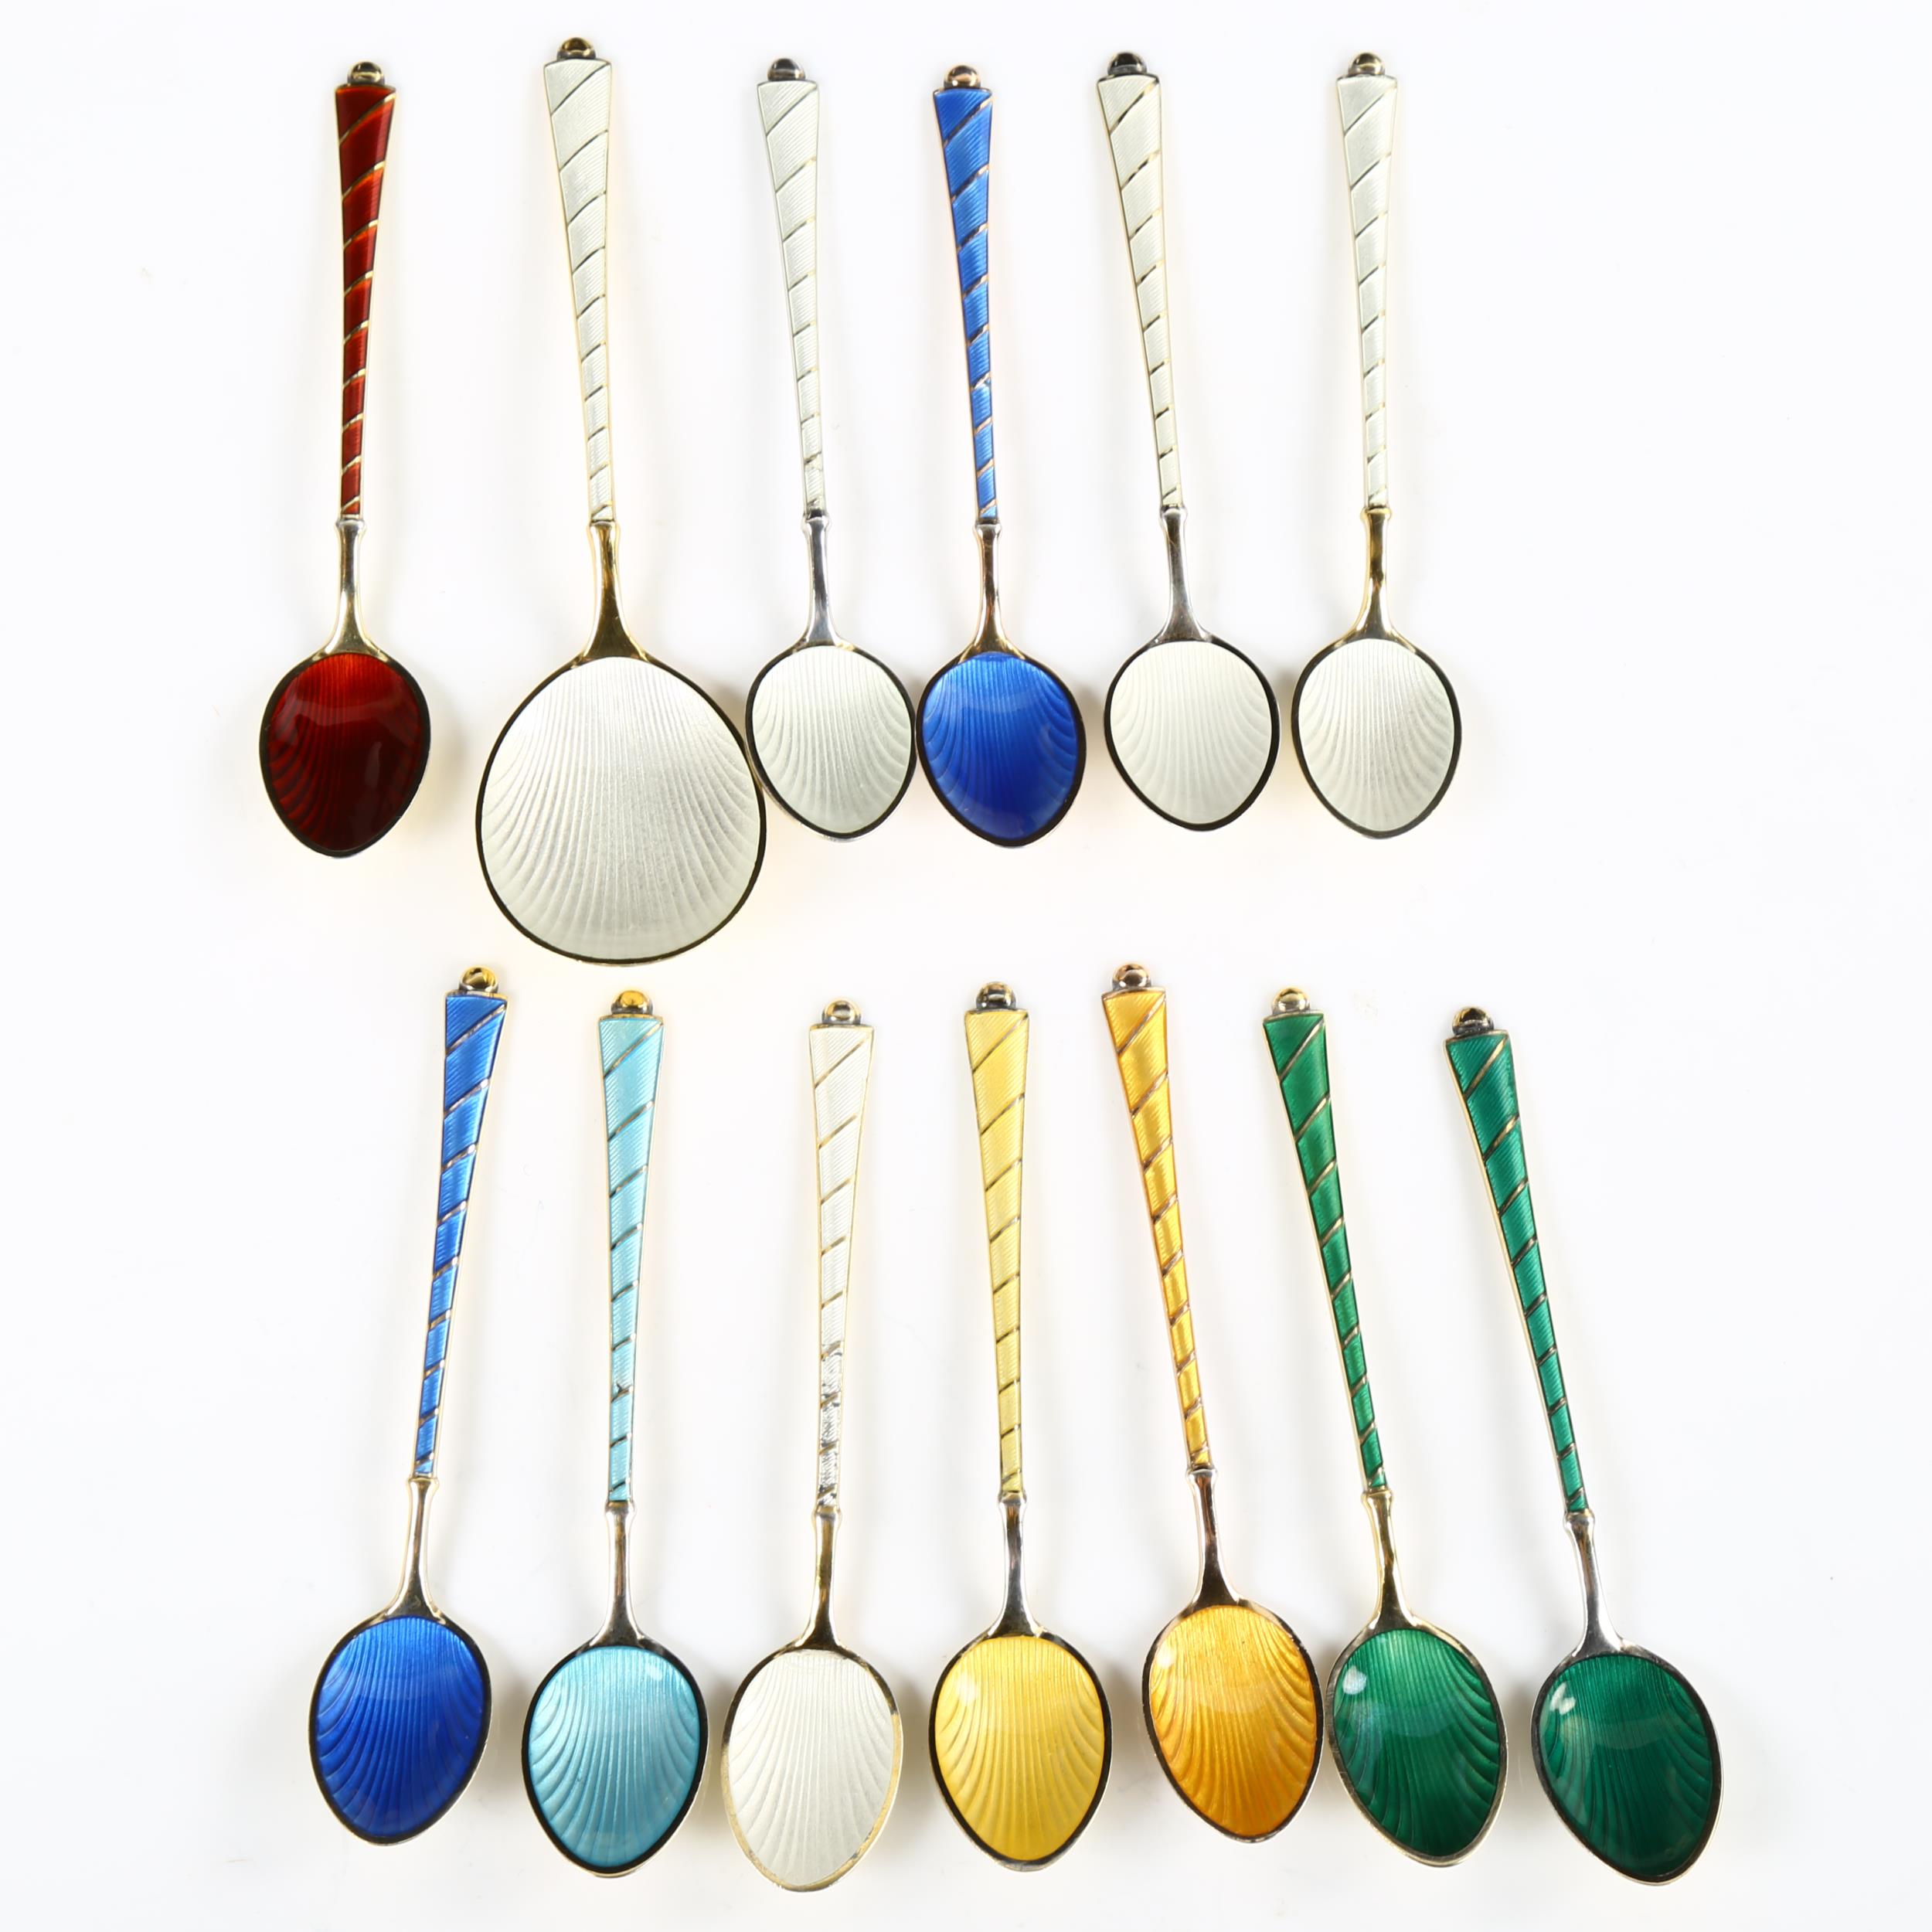 EGON LAURIDSEN - a set of 12 Danish vermeil sterling silver and harlequin enamel coffee spoons and a